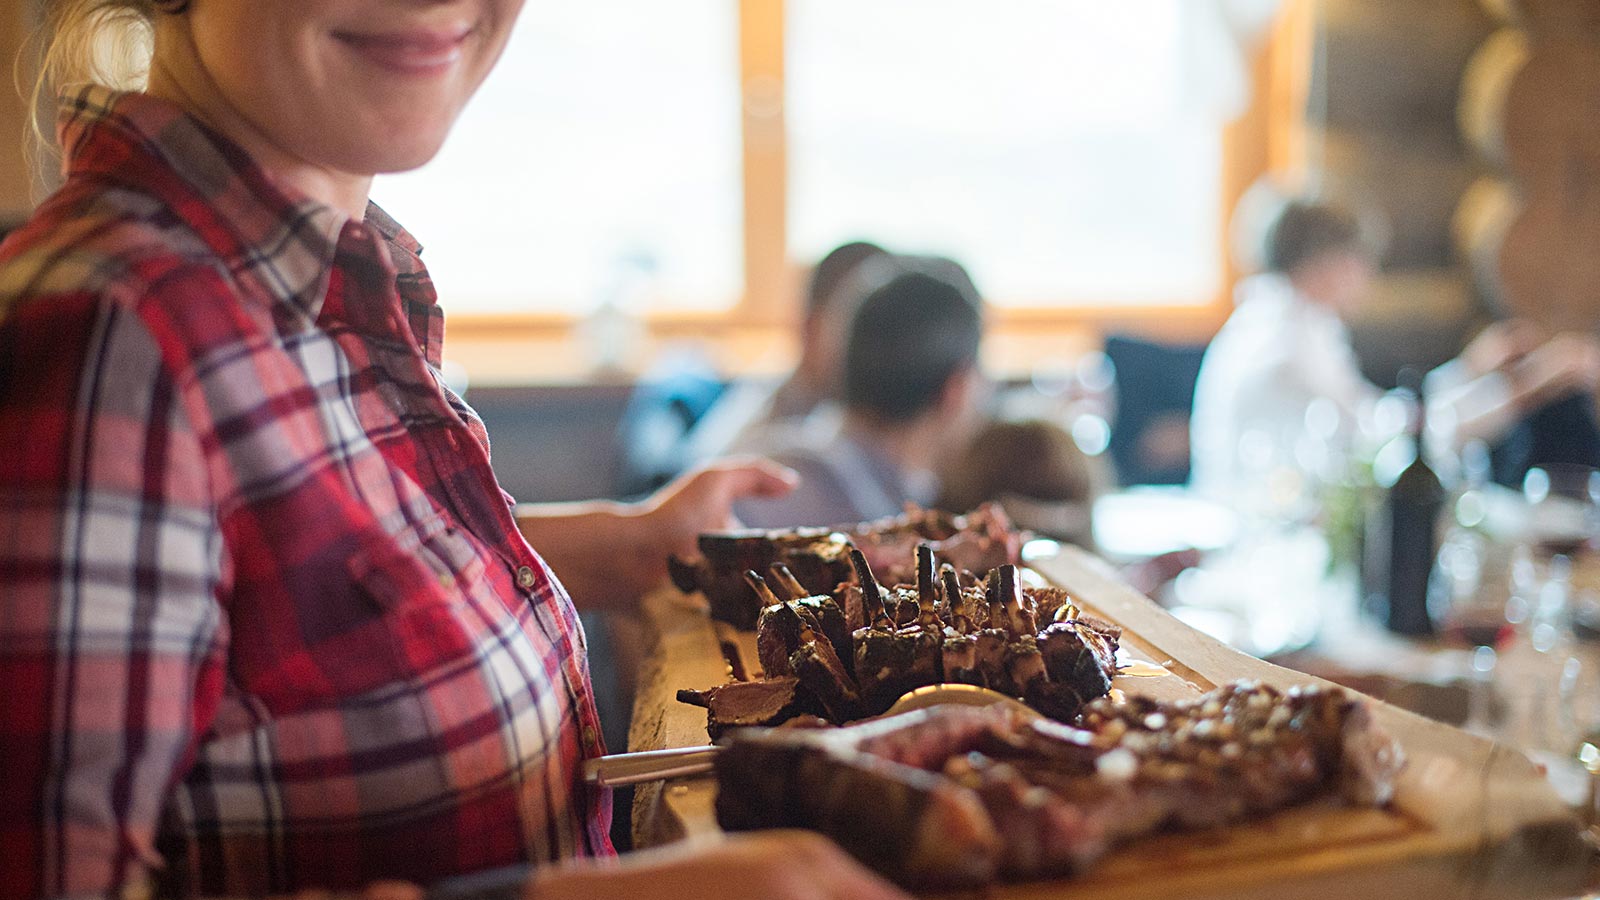 Woman serves wooden chopping board with beef ribs